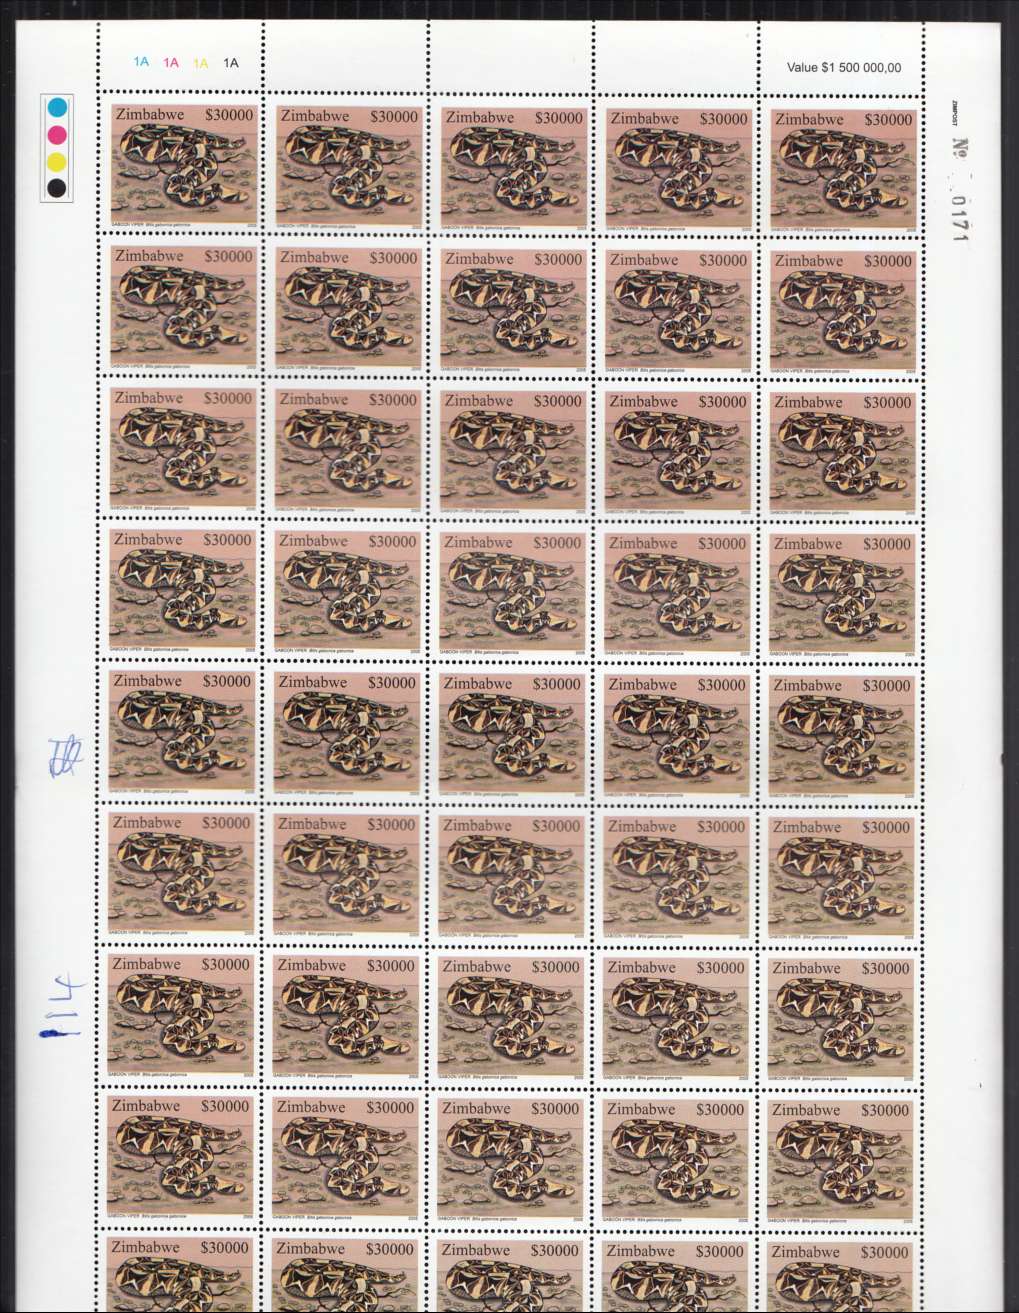 2005 Snakes of Zimbabwe $30,000 Gaboon Viper complete sheet of 50 x 100 sheets U/M, fine. SG 1164